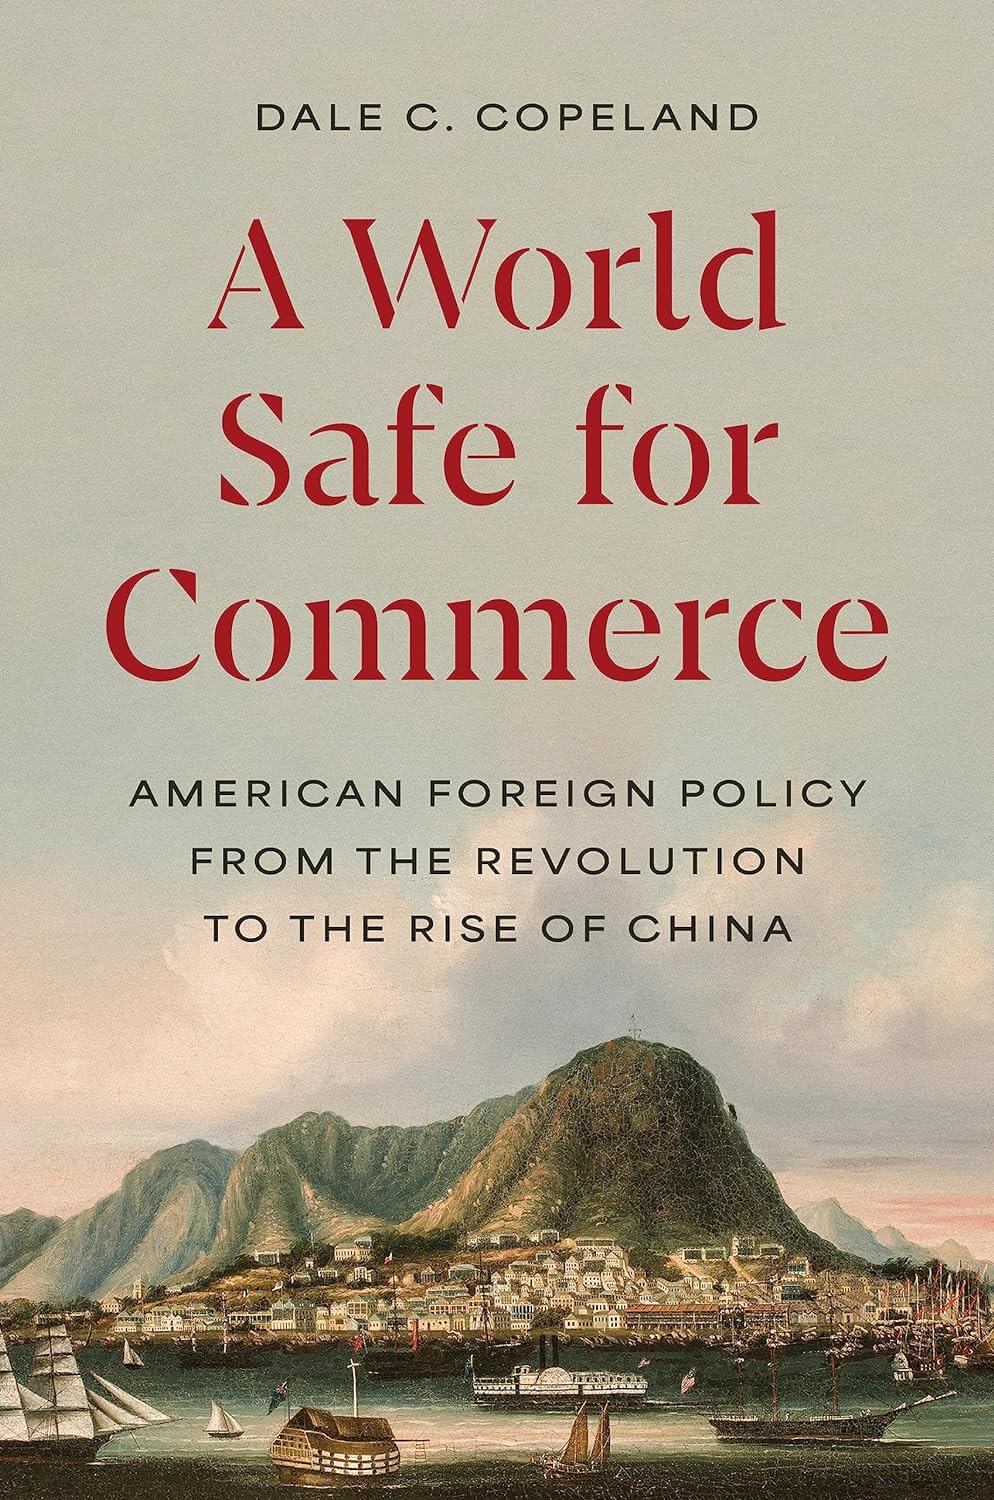 A World Safe for Commerce: American Foreign Policy from the Revolution to the Rise of China (Princeton Studies in International History and Politics